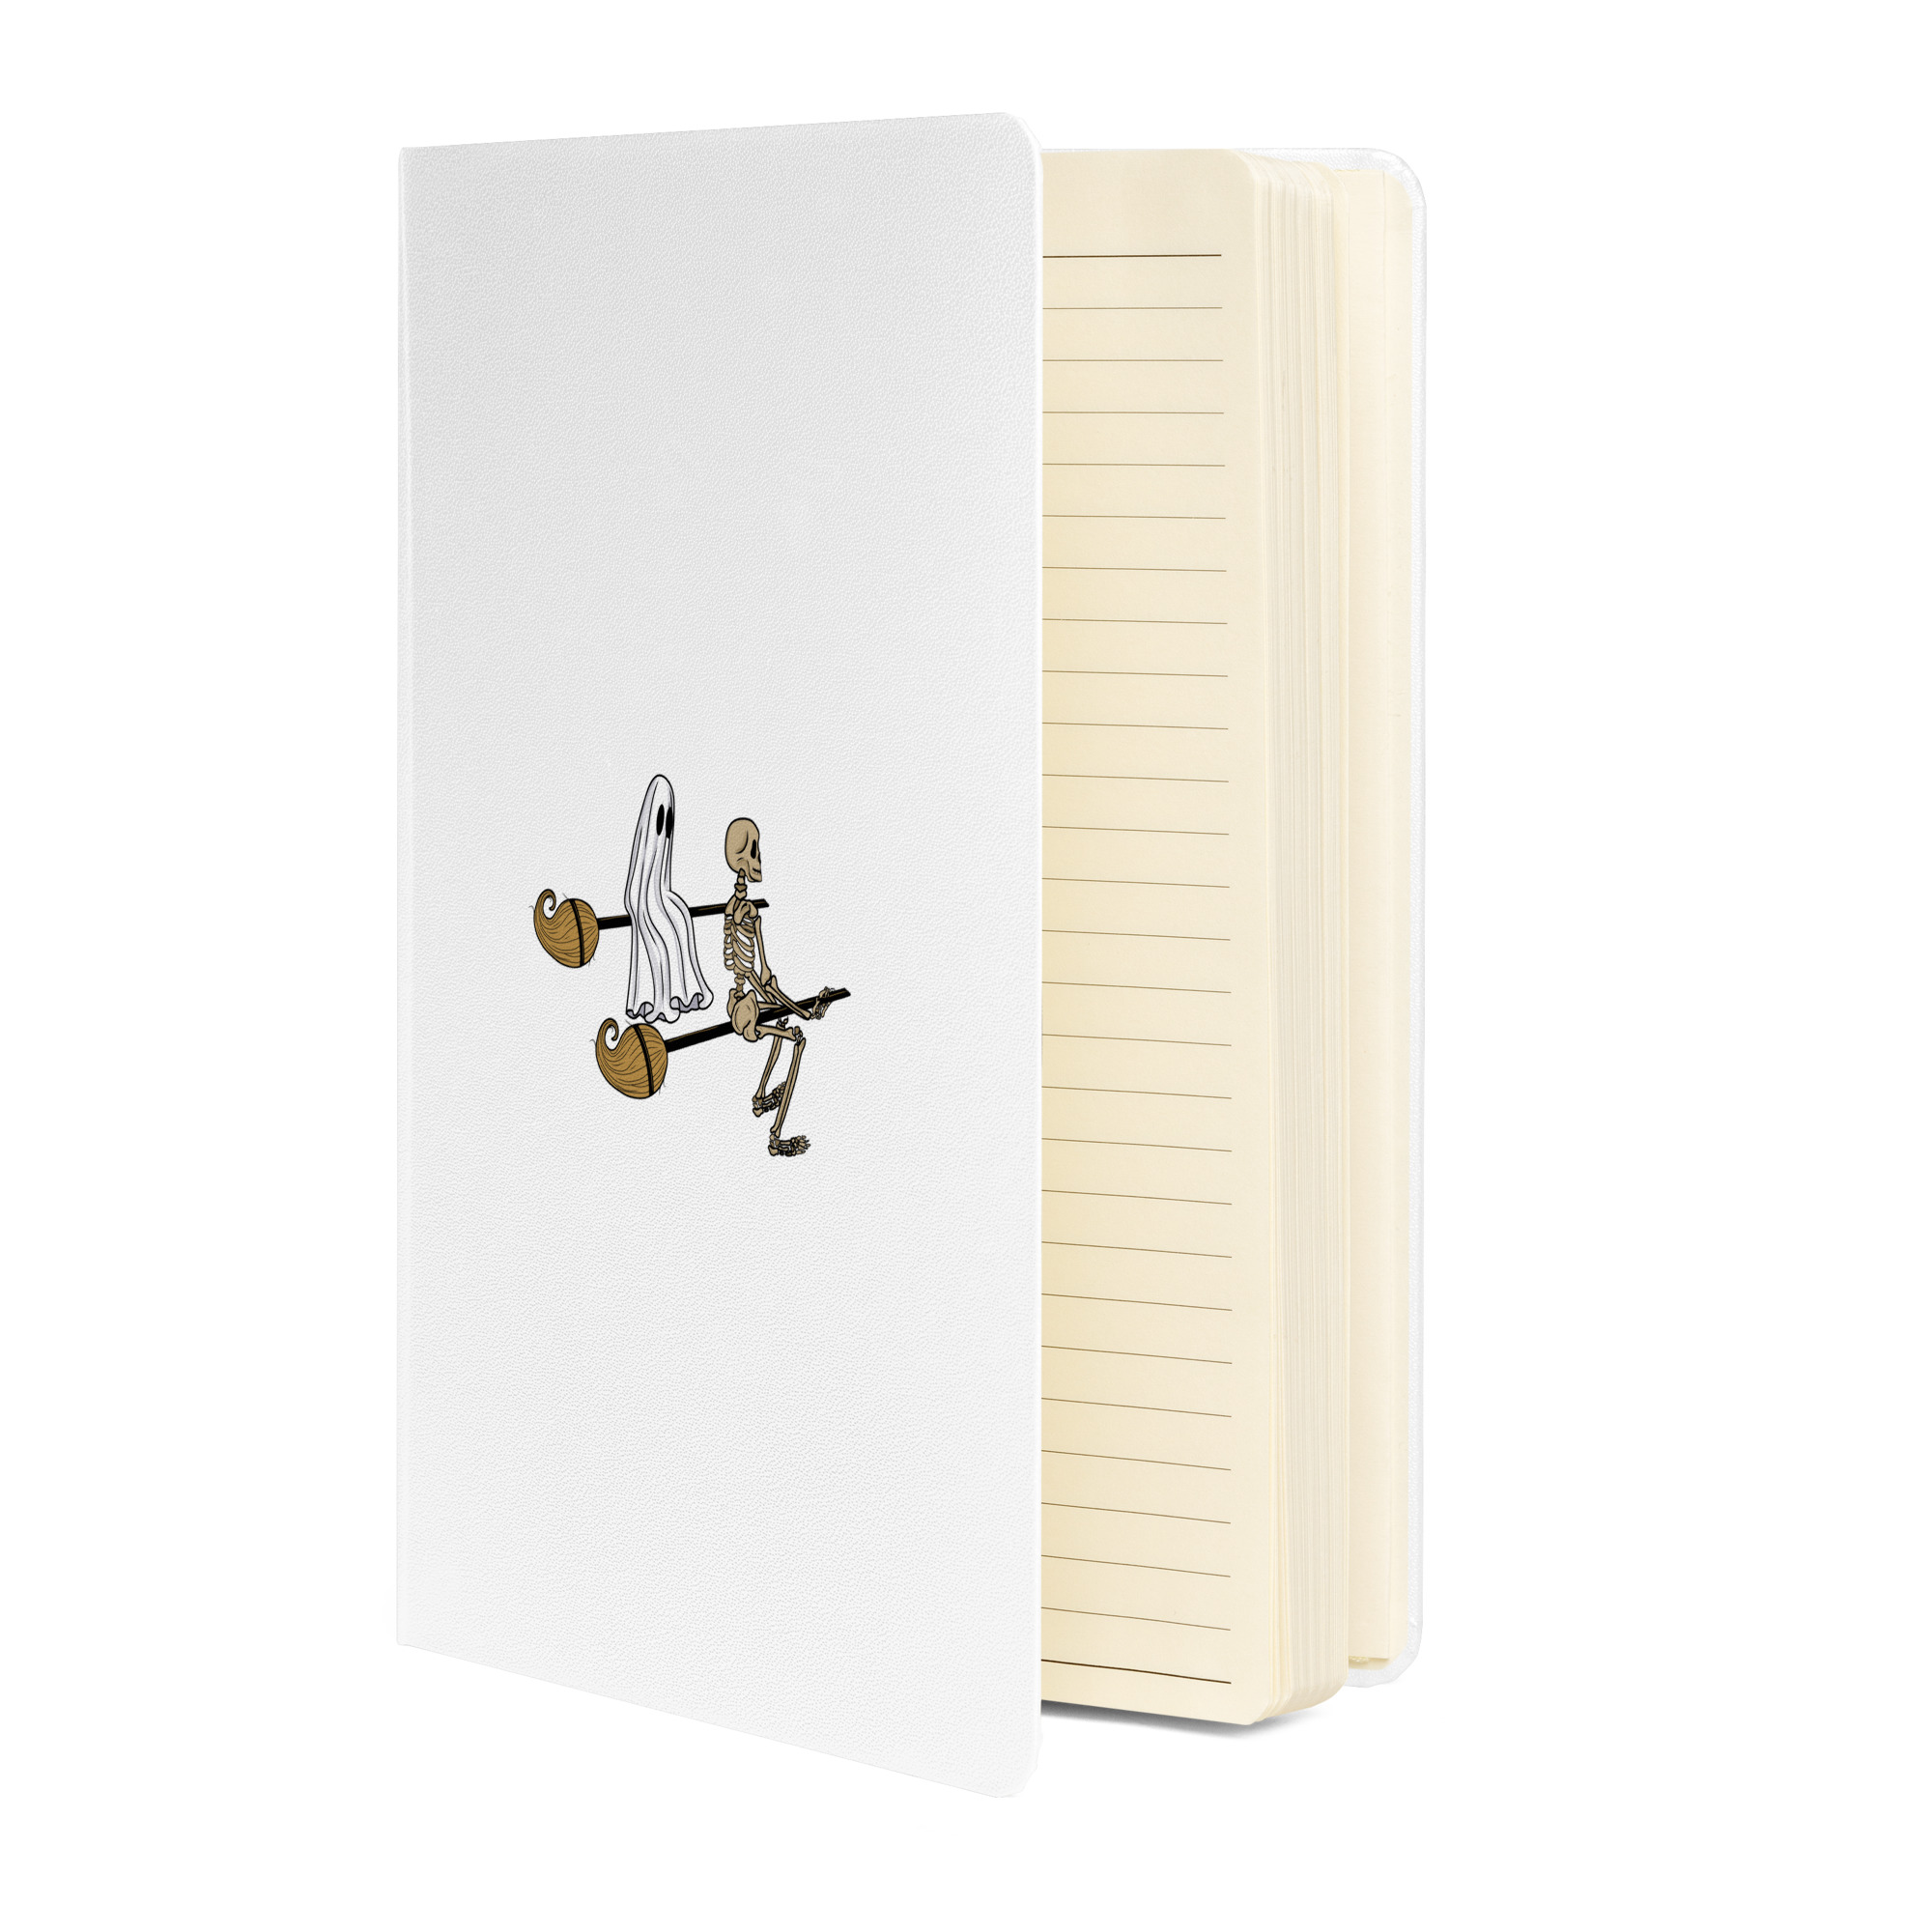 hardcover-bound-notebook-white-front-6537e6eef198a.jpg